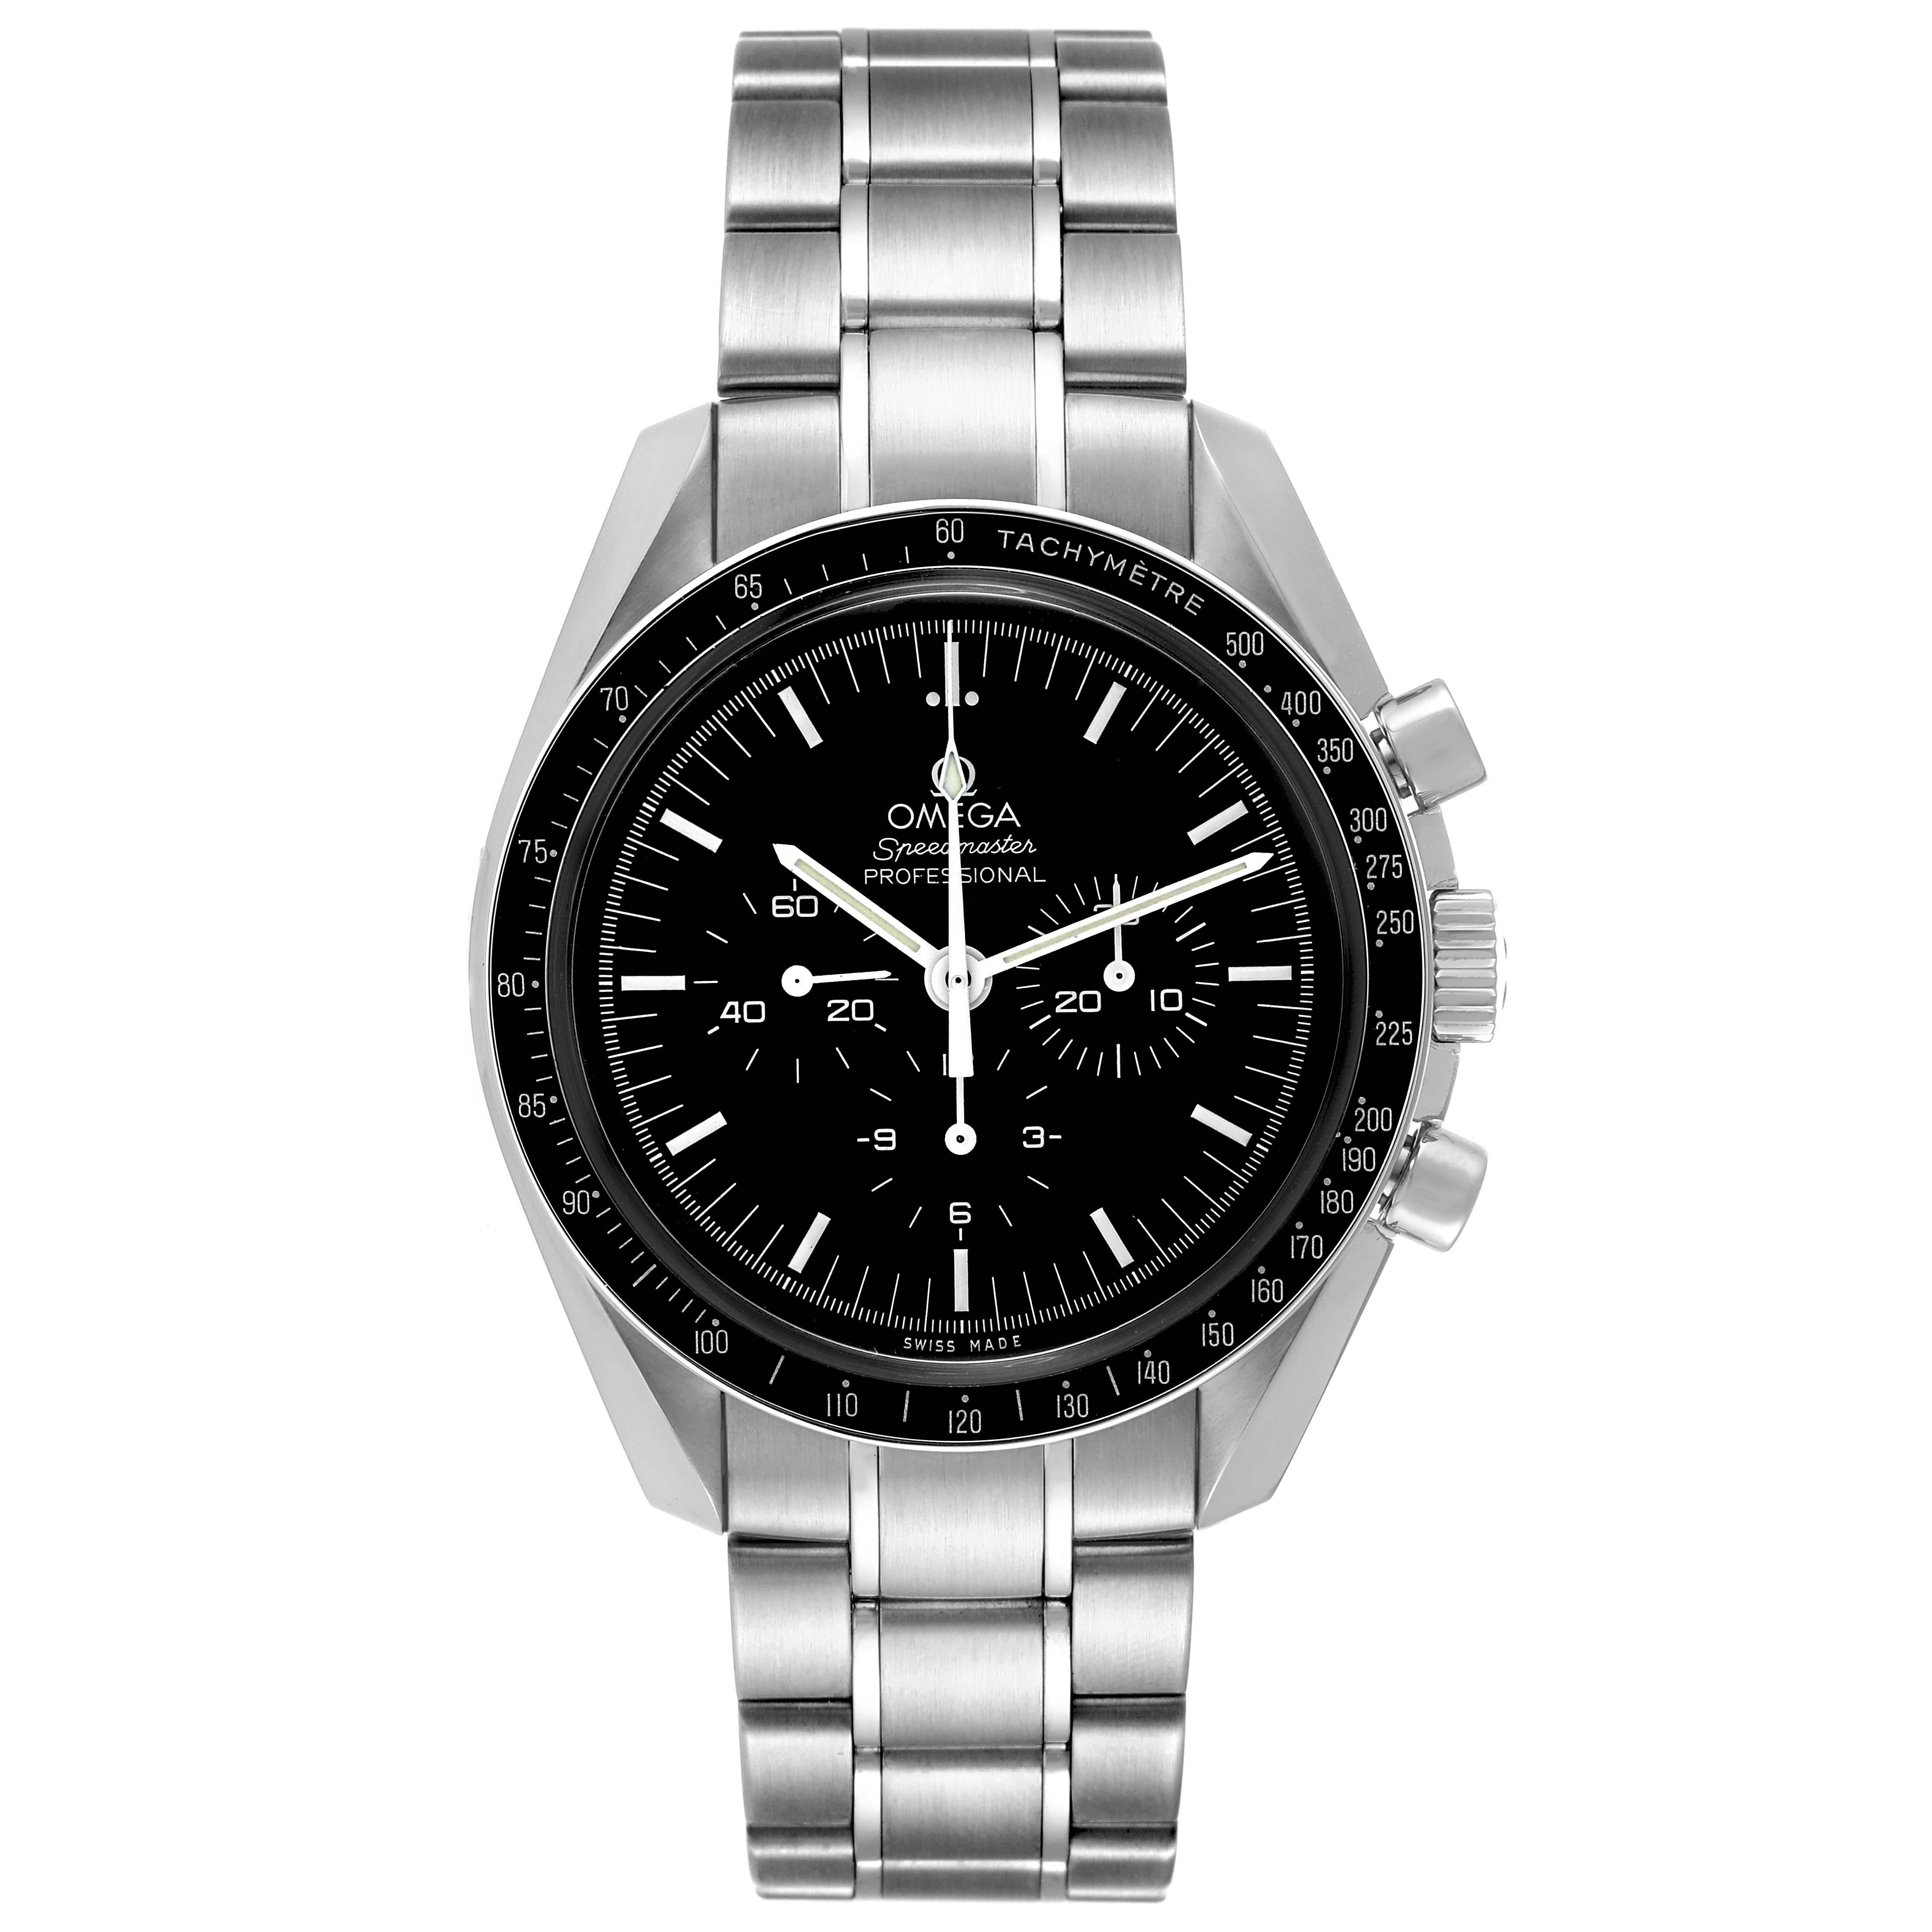 Omega Speedmaster Professional Moonwatch Mens Watch 311.30.42.30.01.005 Box Card. Manual winding chronograph movement. Stainless steel round case 42.0 mm in diameter. Stainless steel bezel with tachymeter function. Hesalite acrylic crystal. Black